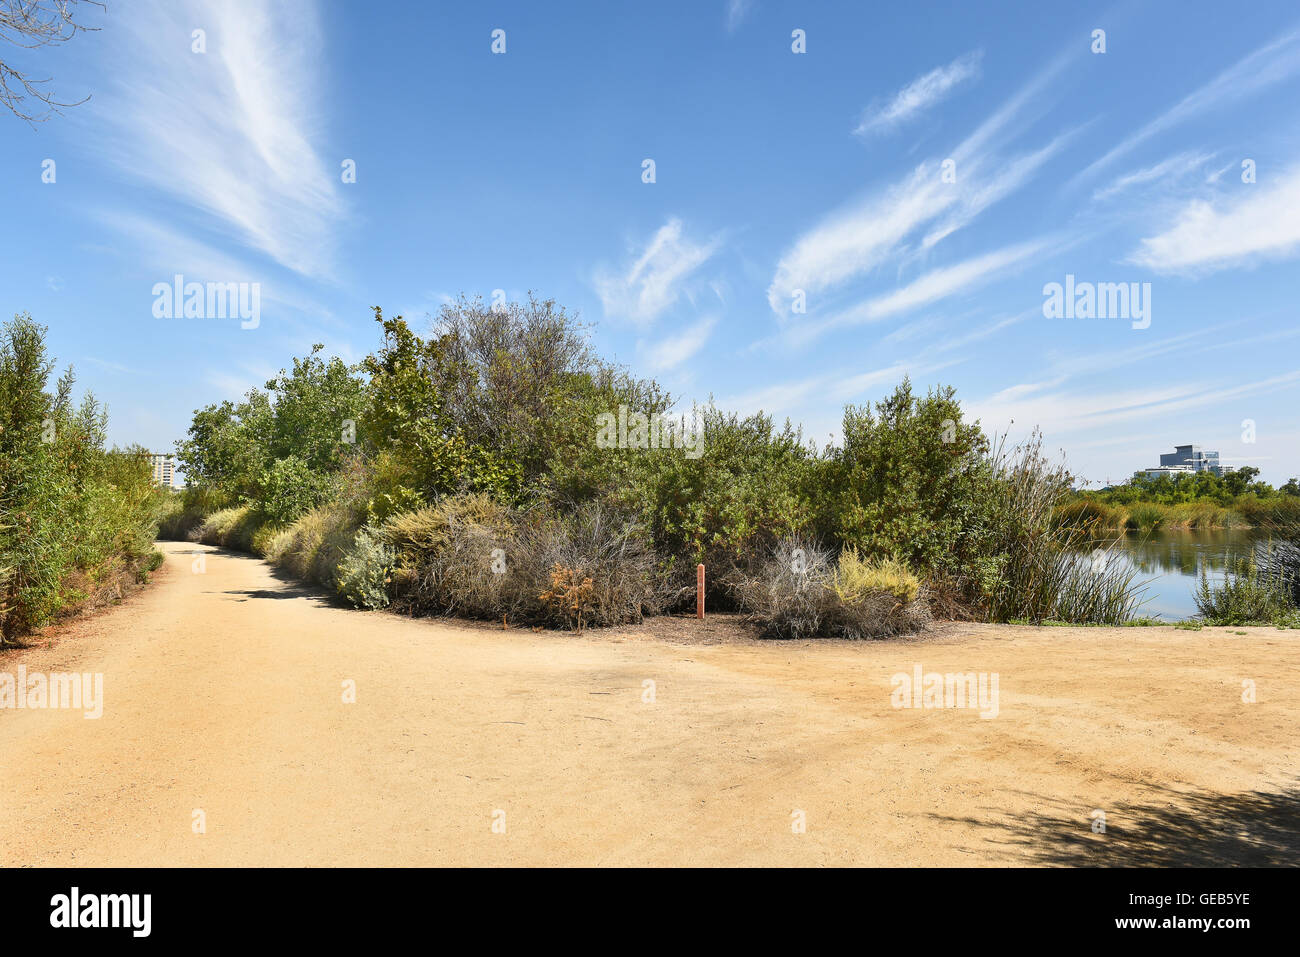 Intersection of the Fledgling Loop Trail and the South Loop Trail at Pond A in the San Joaquin Marsh Reserve, Irvine, CA. Stock Photo